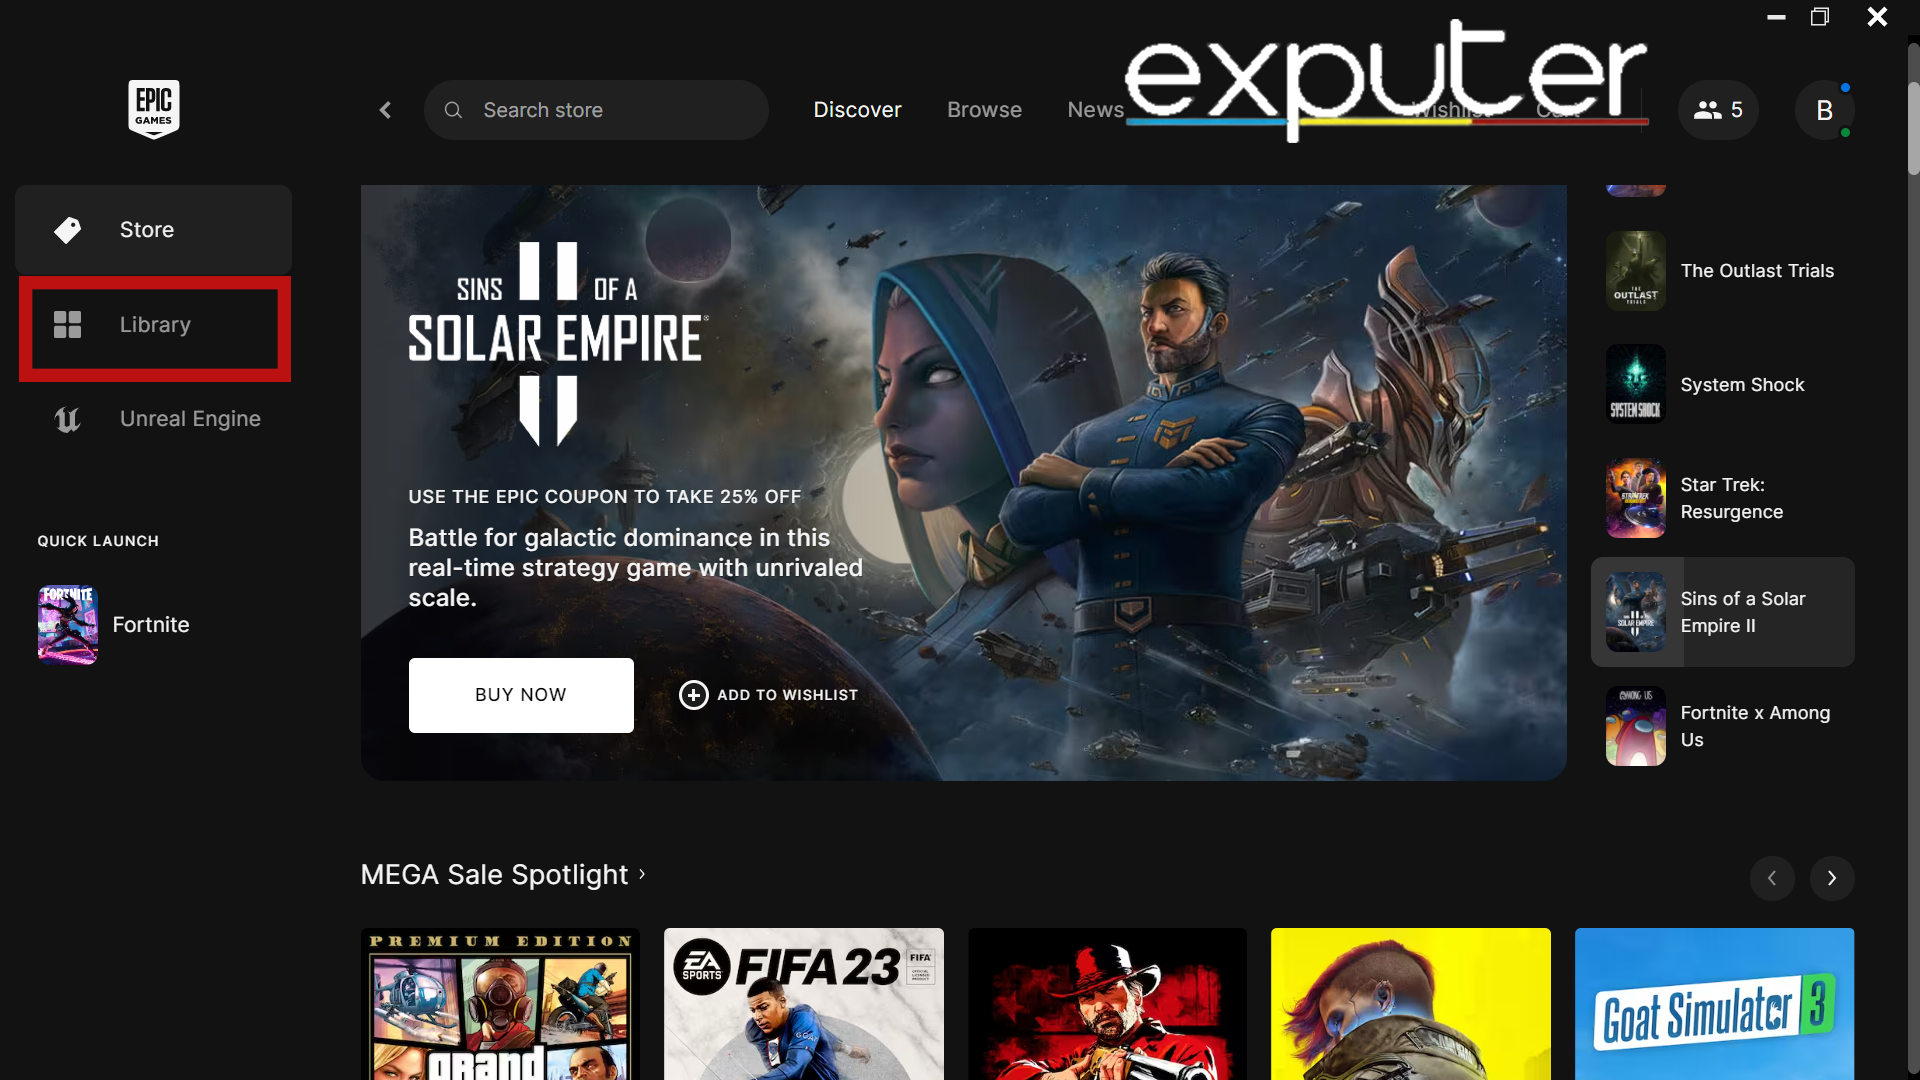 Opening Library Section of Epic Games Launcher. (image by eXputer)